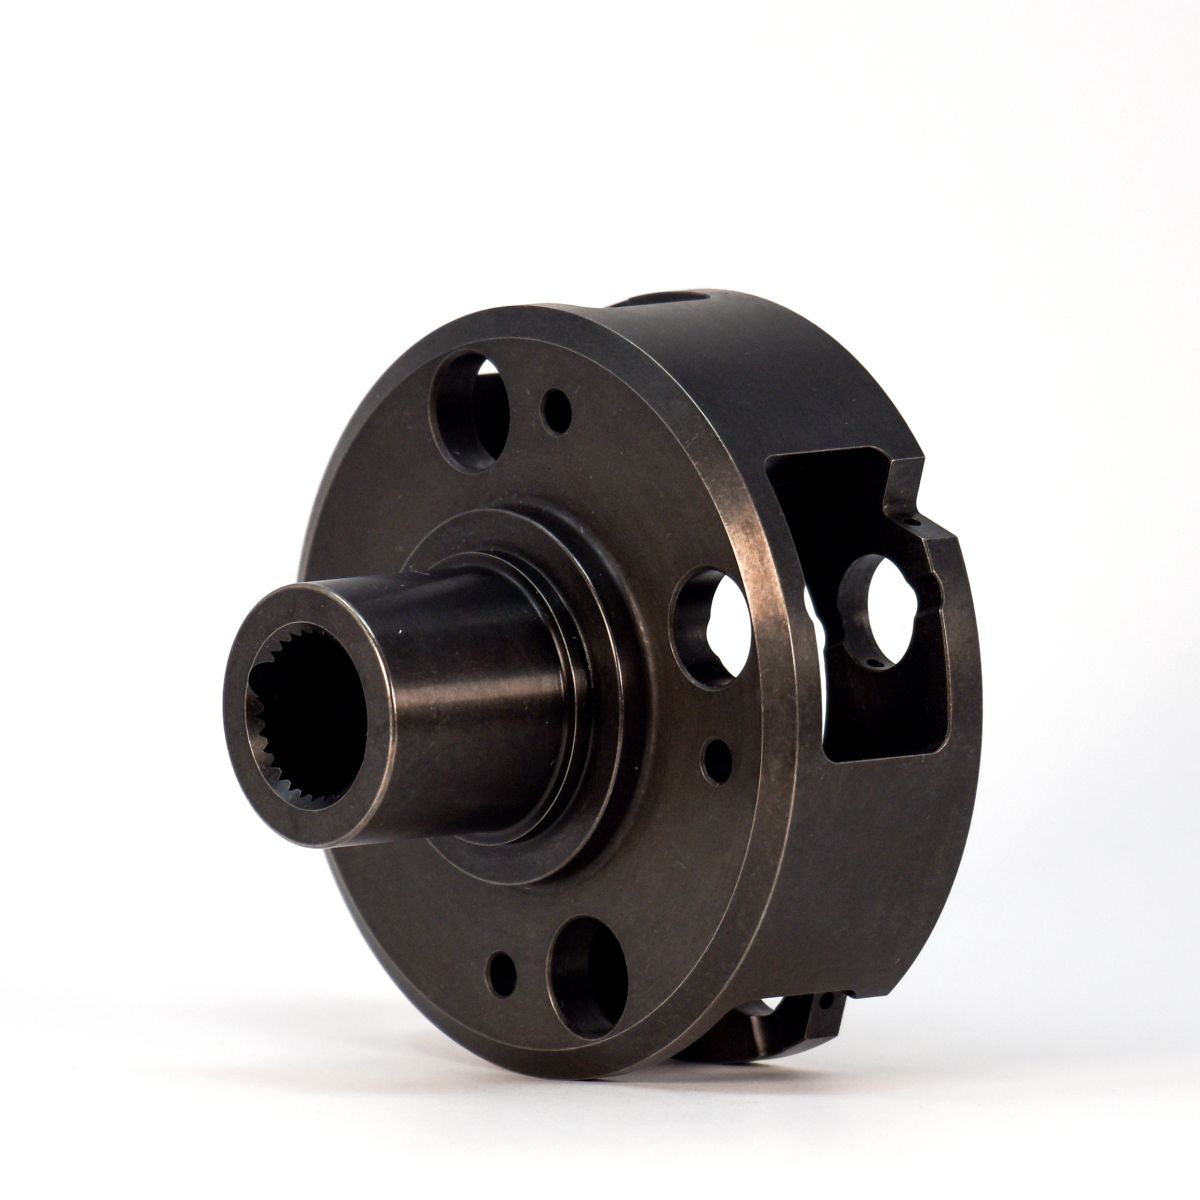 TCS Products - TCS 5R110 4 Pinion OD Planetary Housing For 03-10 Ford 6.0L 6.4L Powerstroke